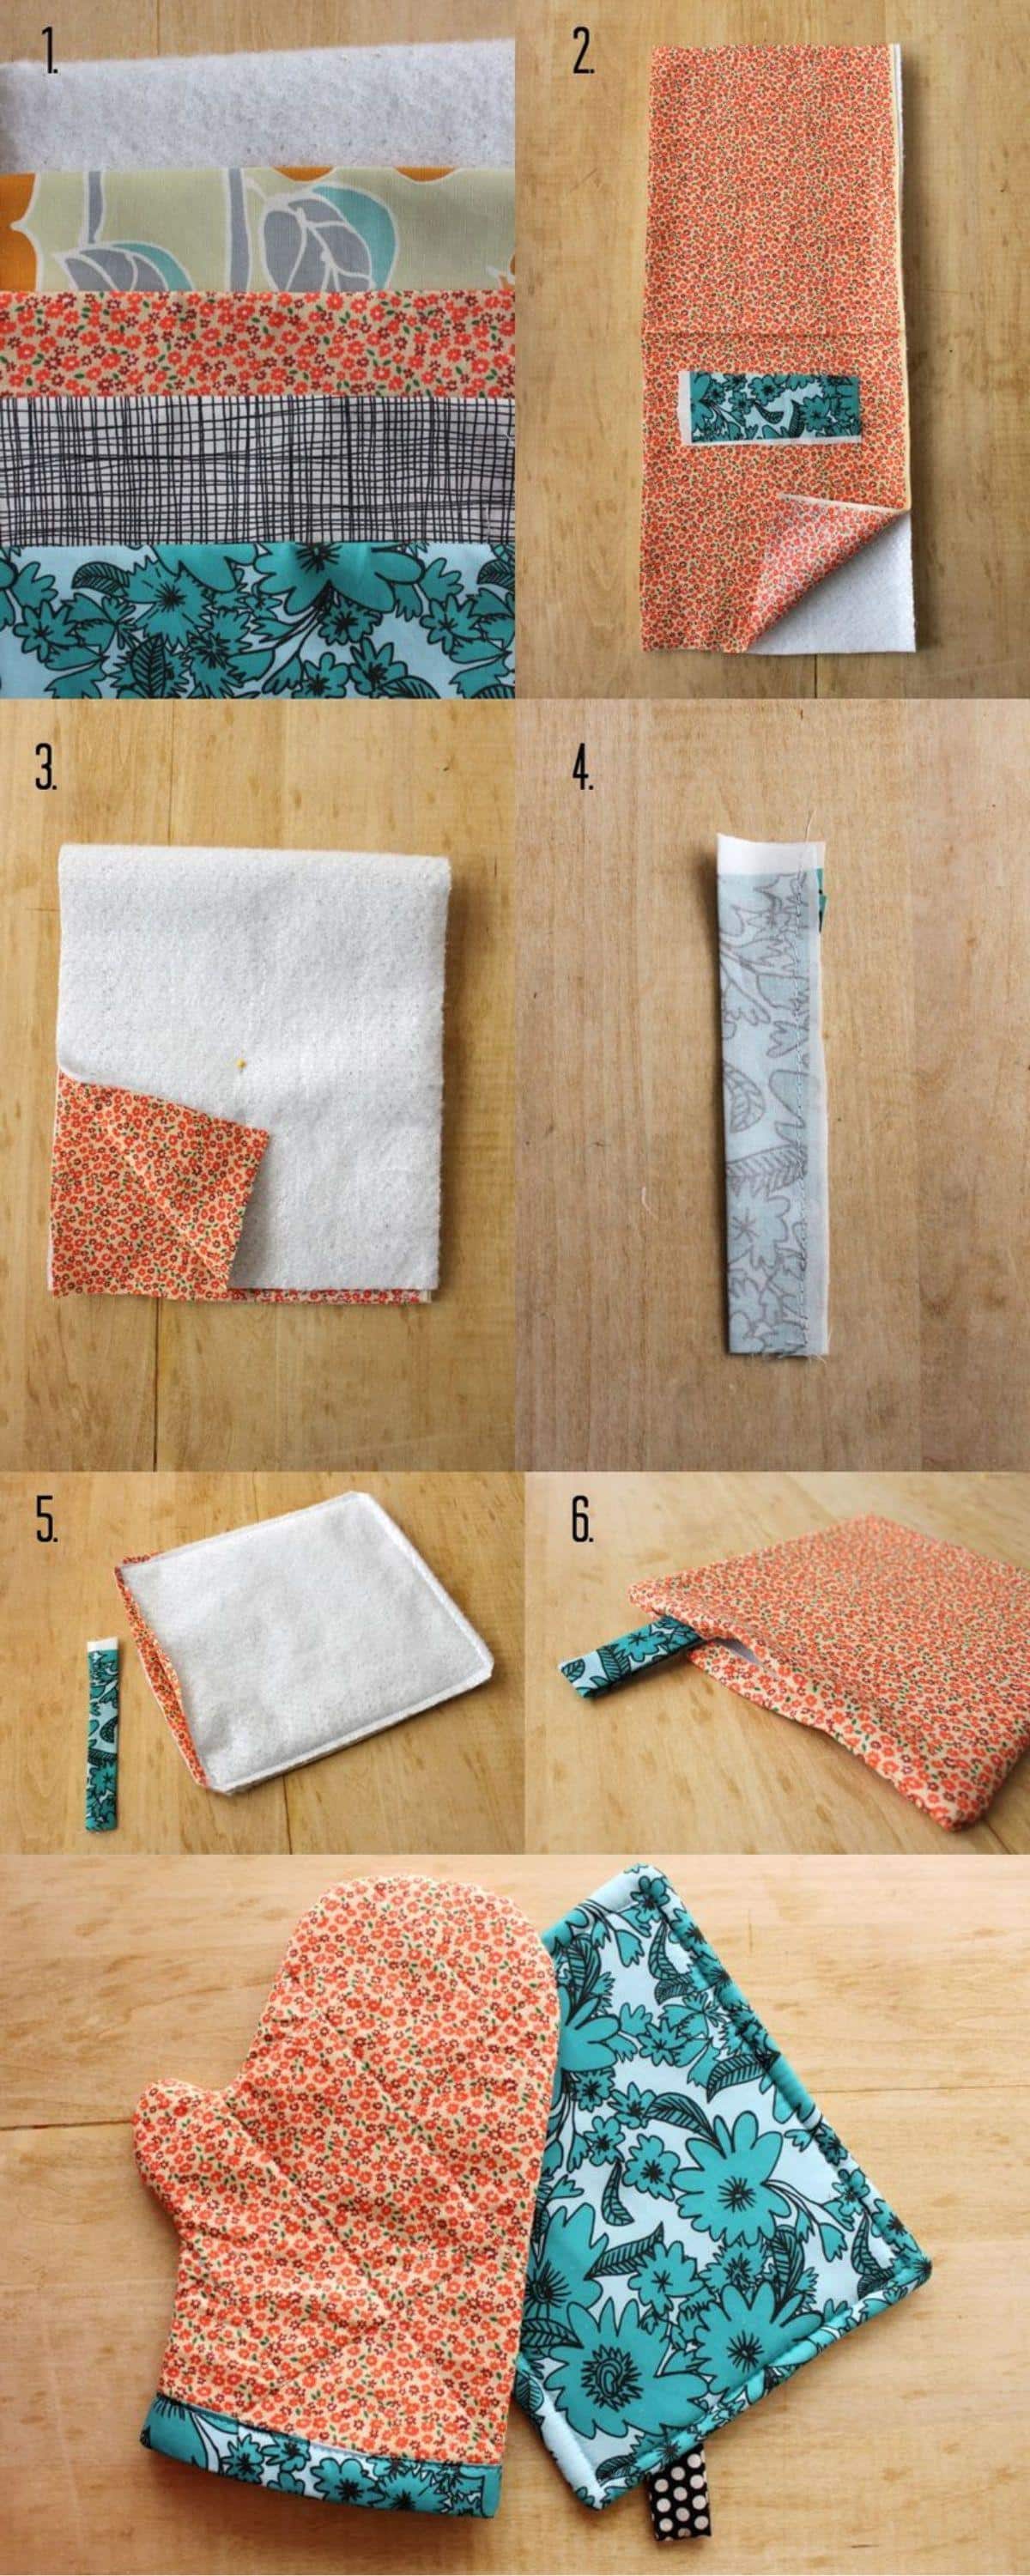 DIY Oven Mitts